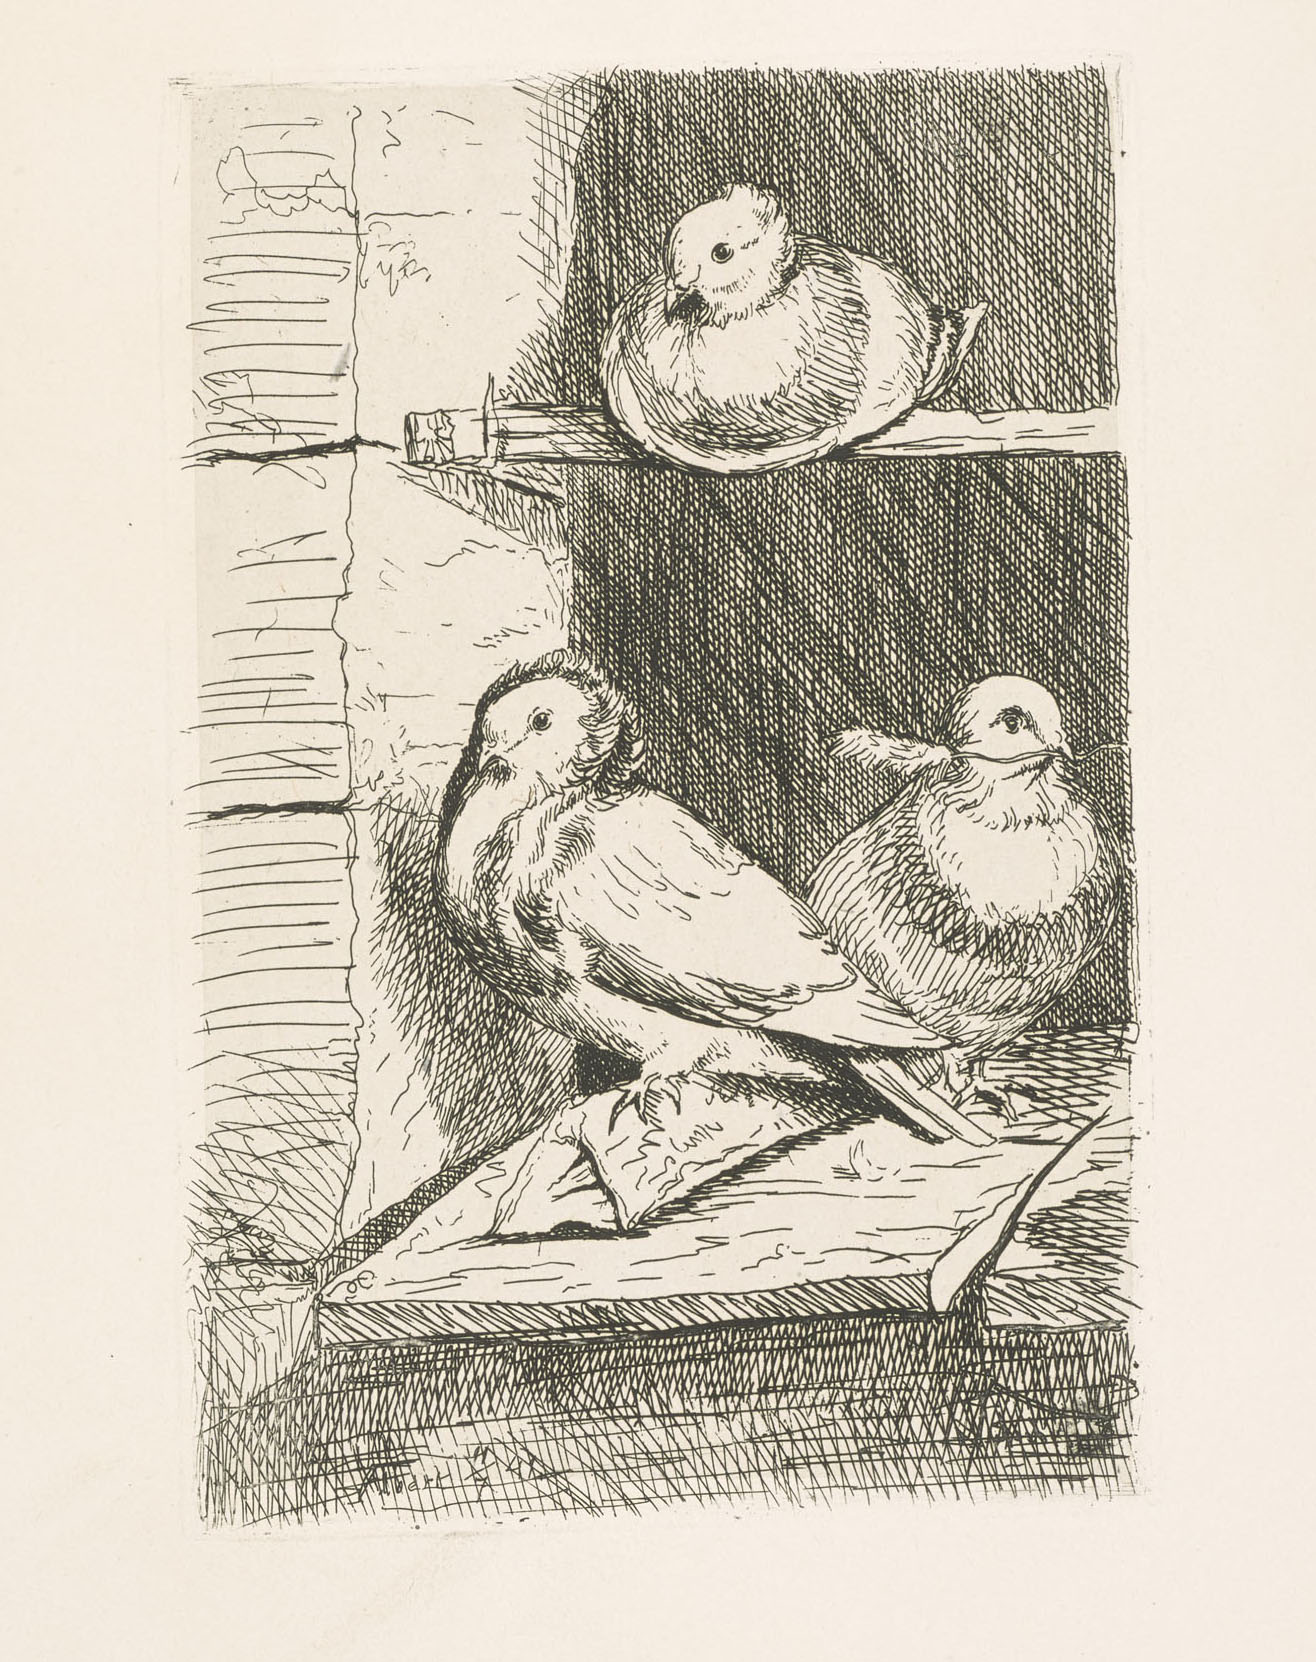 Another impression of RCIN 816154. An etching showing three pigeons roosting. After Henri Voordecker (RCIN 403872). Two pigeons are shown resting on a beam with a further pigeon shown balanced on a beam above. Inscribed lower left: Albert 11/7 41. Prince 